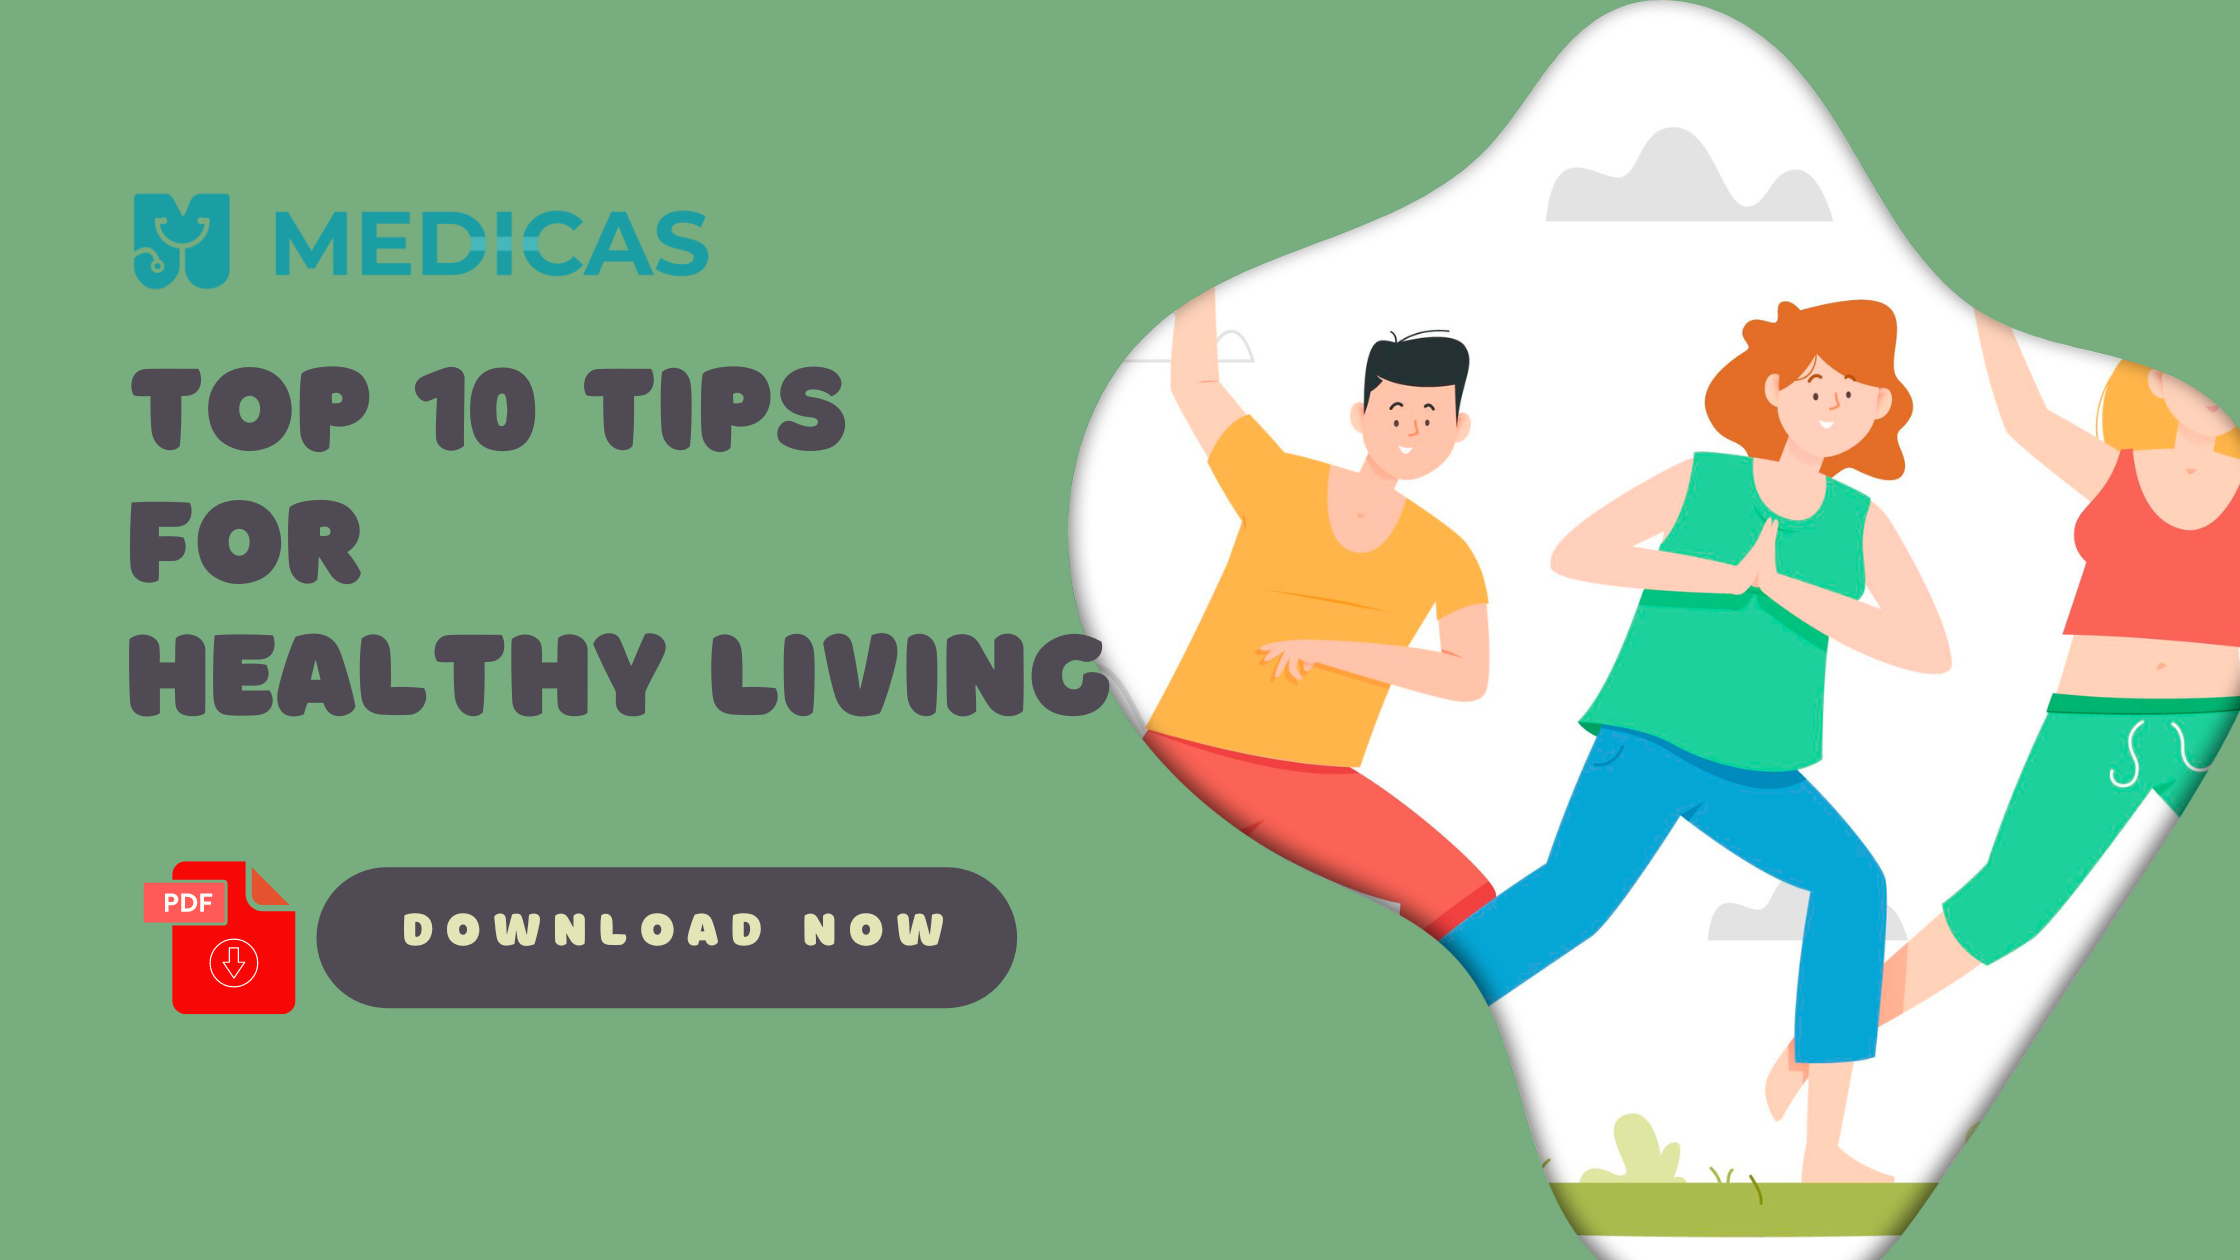 Dr. Shruti Goswami’s “Top 10 Tips for Healthy Living” (Download the FREE PDF!)